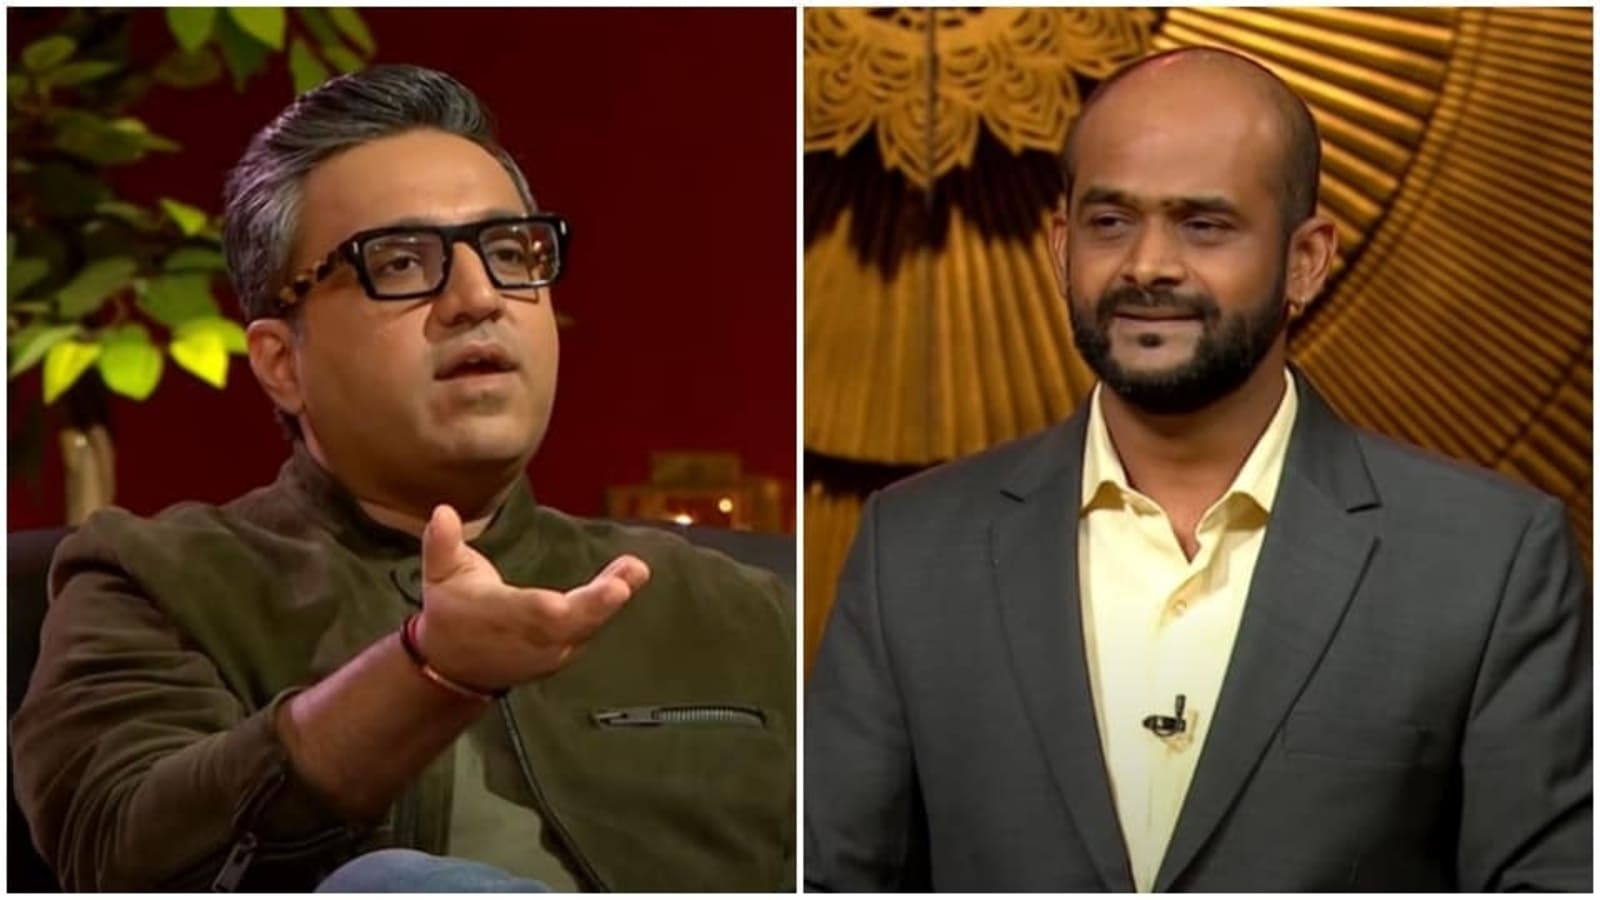 Shark Tank India’s Ashneer Grover roasted by Sippline founder, repeats his line ‘Bhagwan utha le’. Watch video